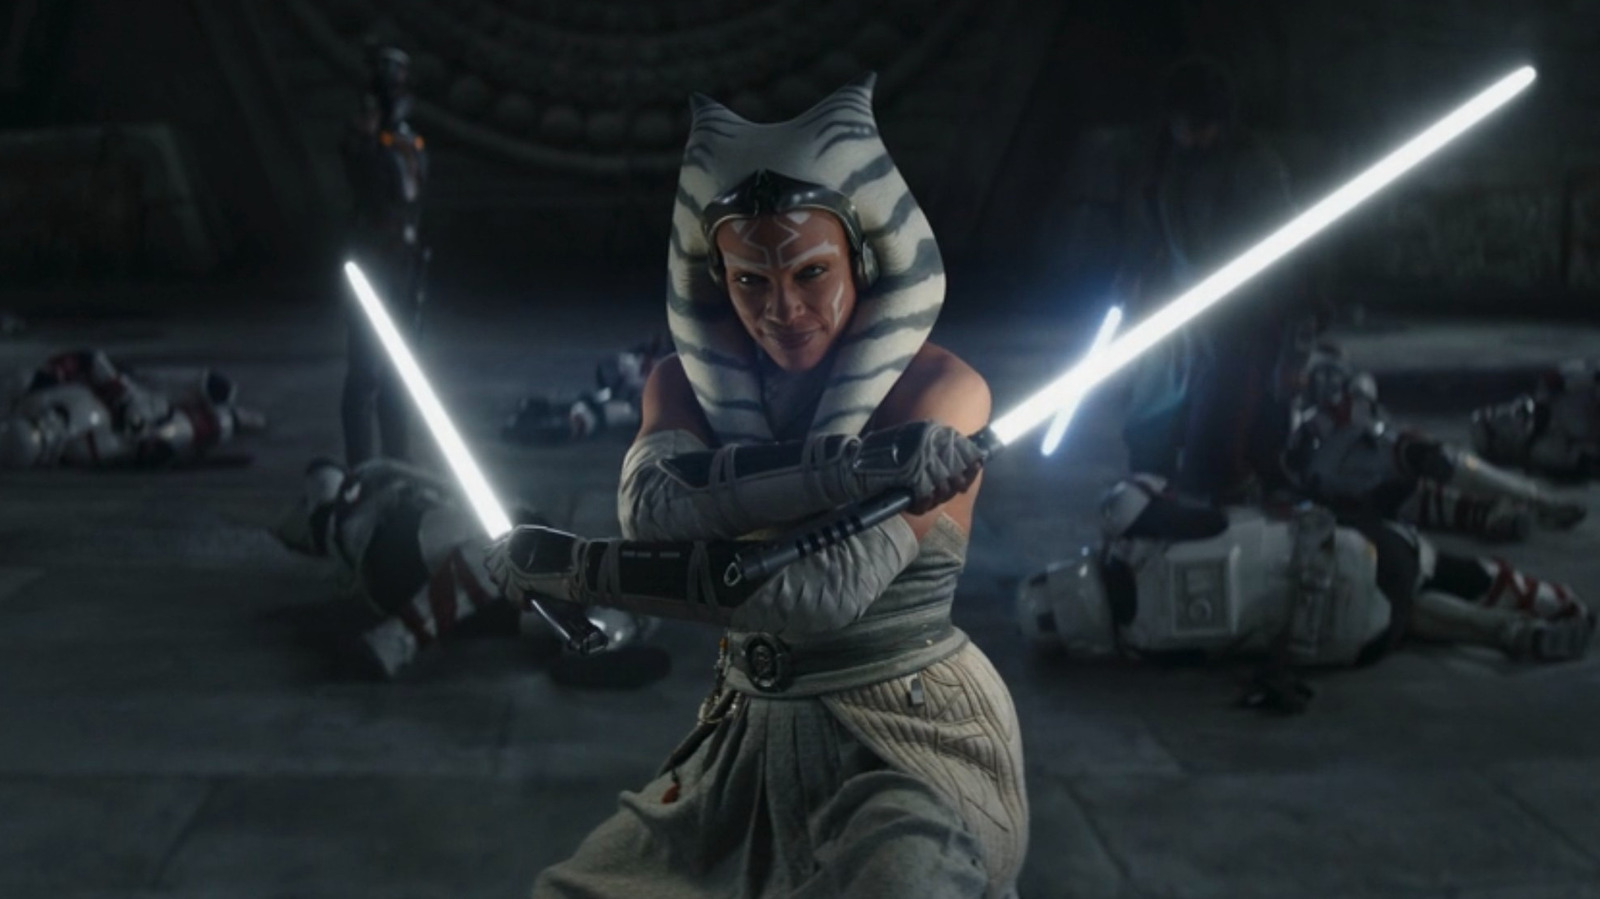 Star Wars: Ahsoka Just Confirmed One of the Most Controversial